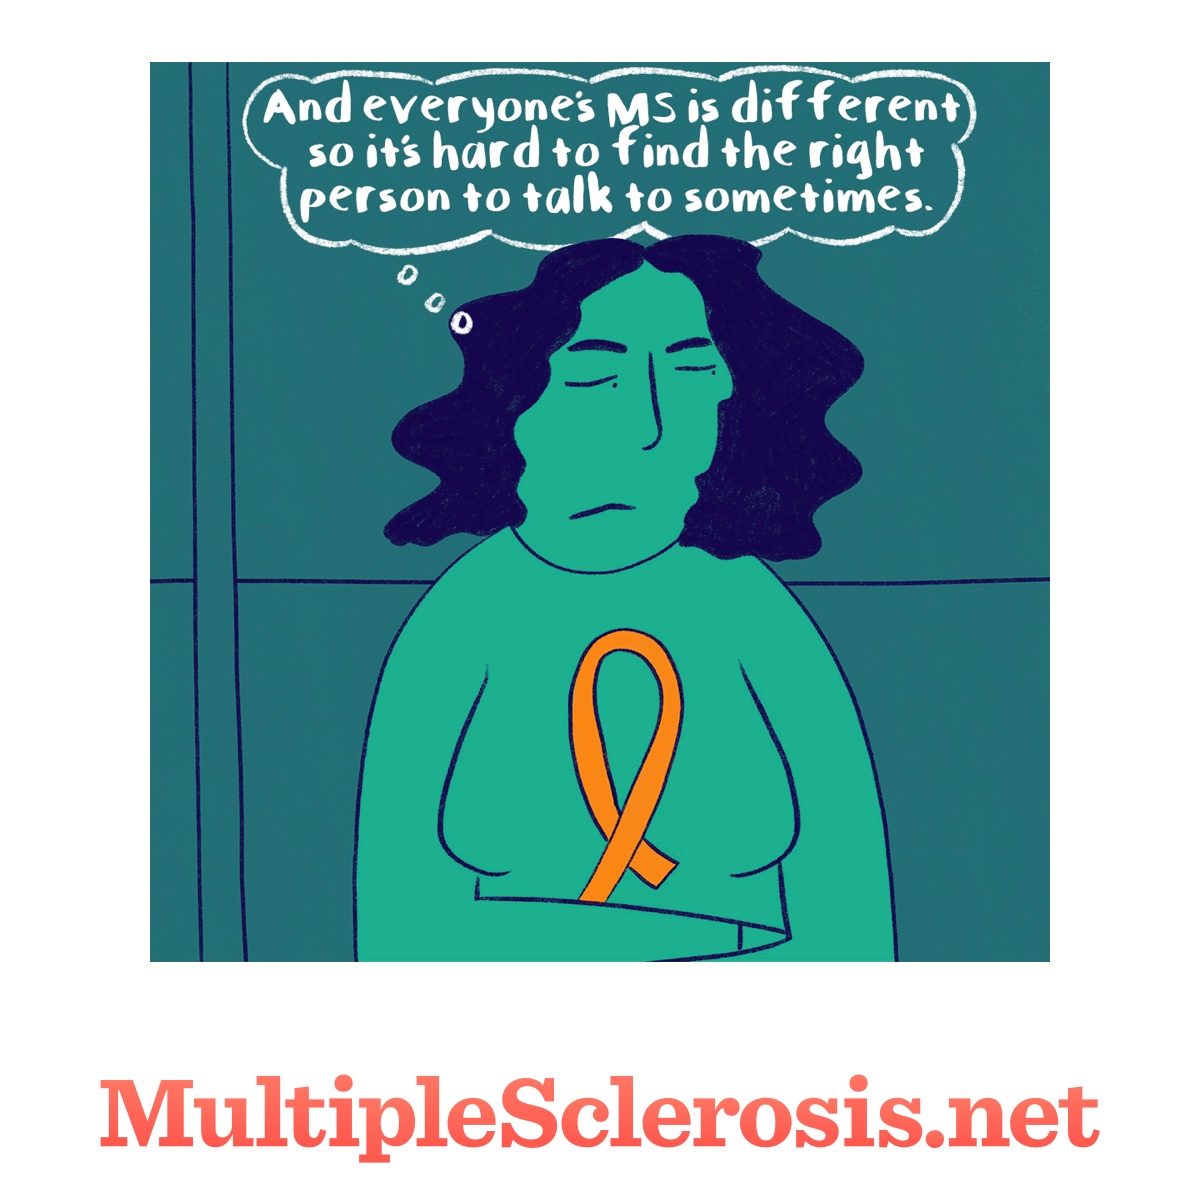 Woman standing with arms crossed wearing ms awareness shirt text reads: And everyones MS is different so its hard to find the right person to talk to sometimes